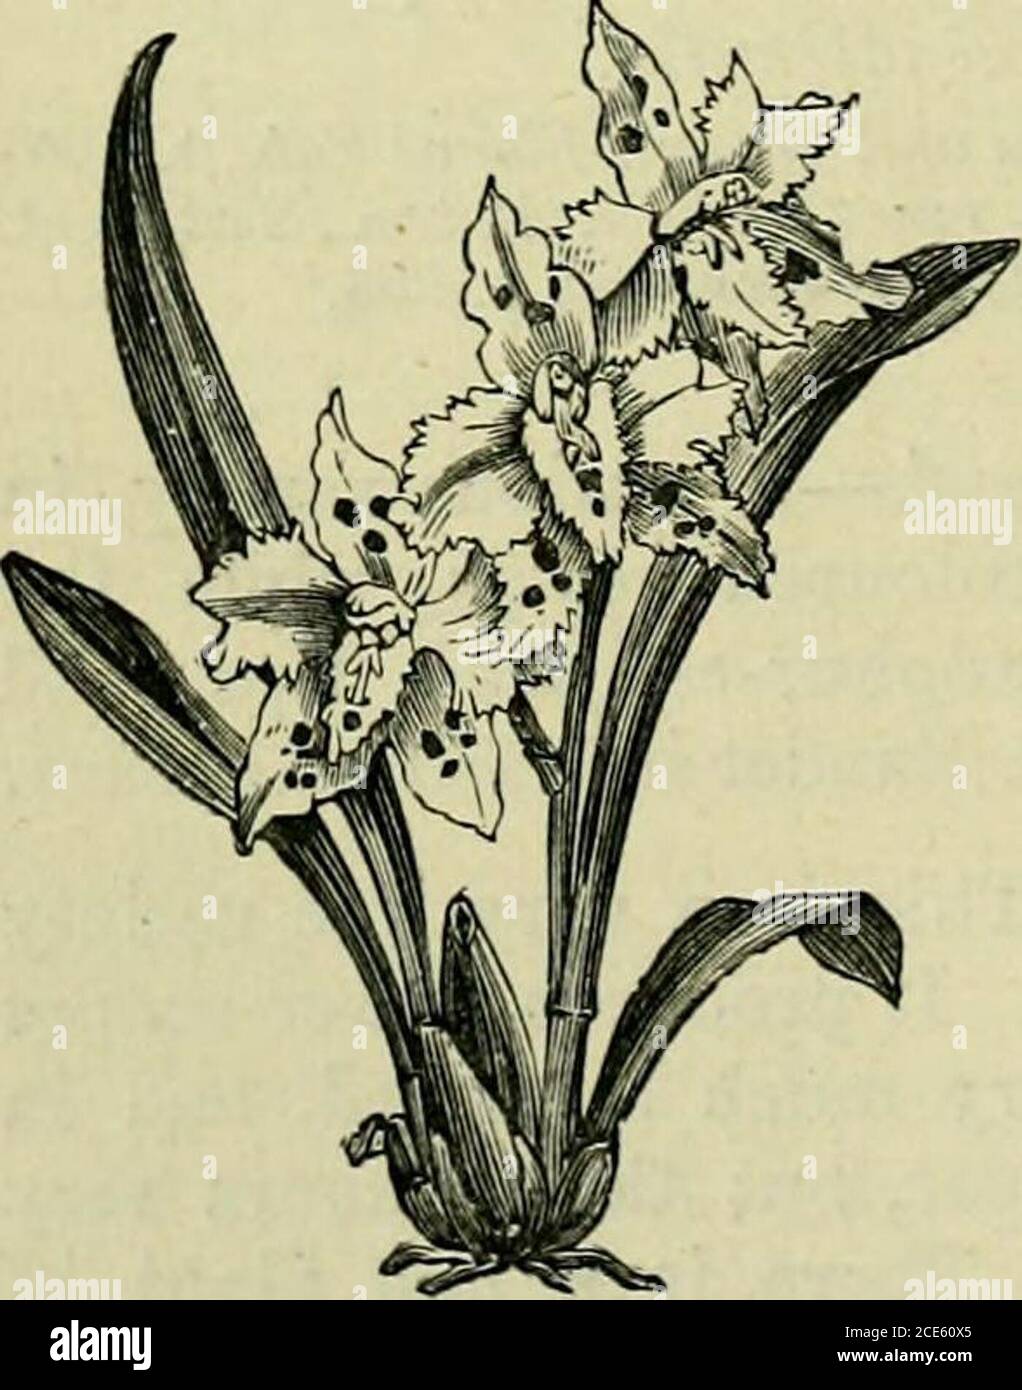 . The orchid-grower's manual : containing descriptions of the best species and varieties of orchidaceous plants . to yellow and rose, andincluding various highly spotted forms. The pseudobulbsare oblong ovate compressed,with a pair of ligulate oblongacute leaves, and radical scapesfrom the axils of accessory leaves,bearing racemes or panicles ofthe lovely flowers, which oftenhave the ovate lanceolate sepalsflushed with rose, the broadlyovate pure white petals beingmuch undulated, and the oblongovate lip much crisped and acu-minate, with a rich yellow stainover the discal portion, andhaving one Stock Photo